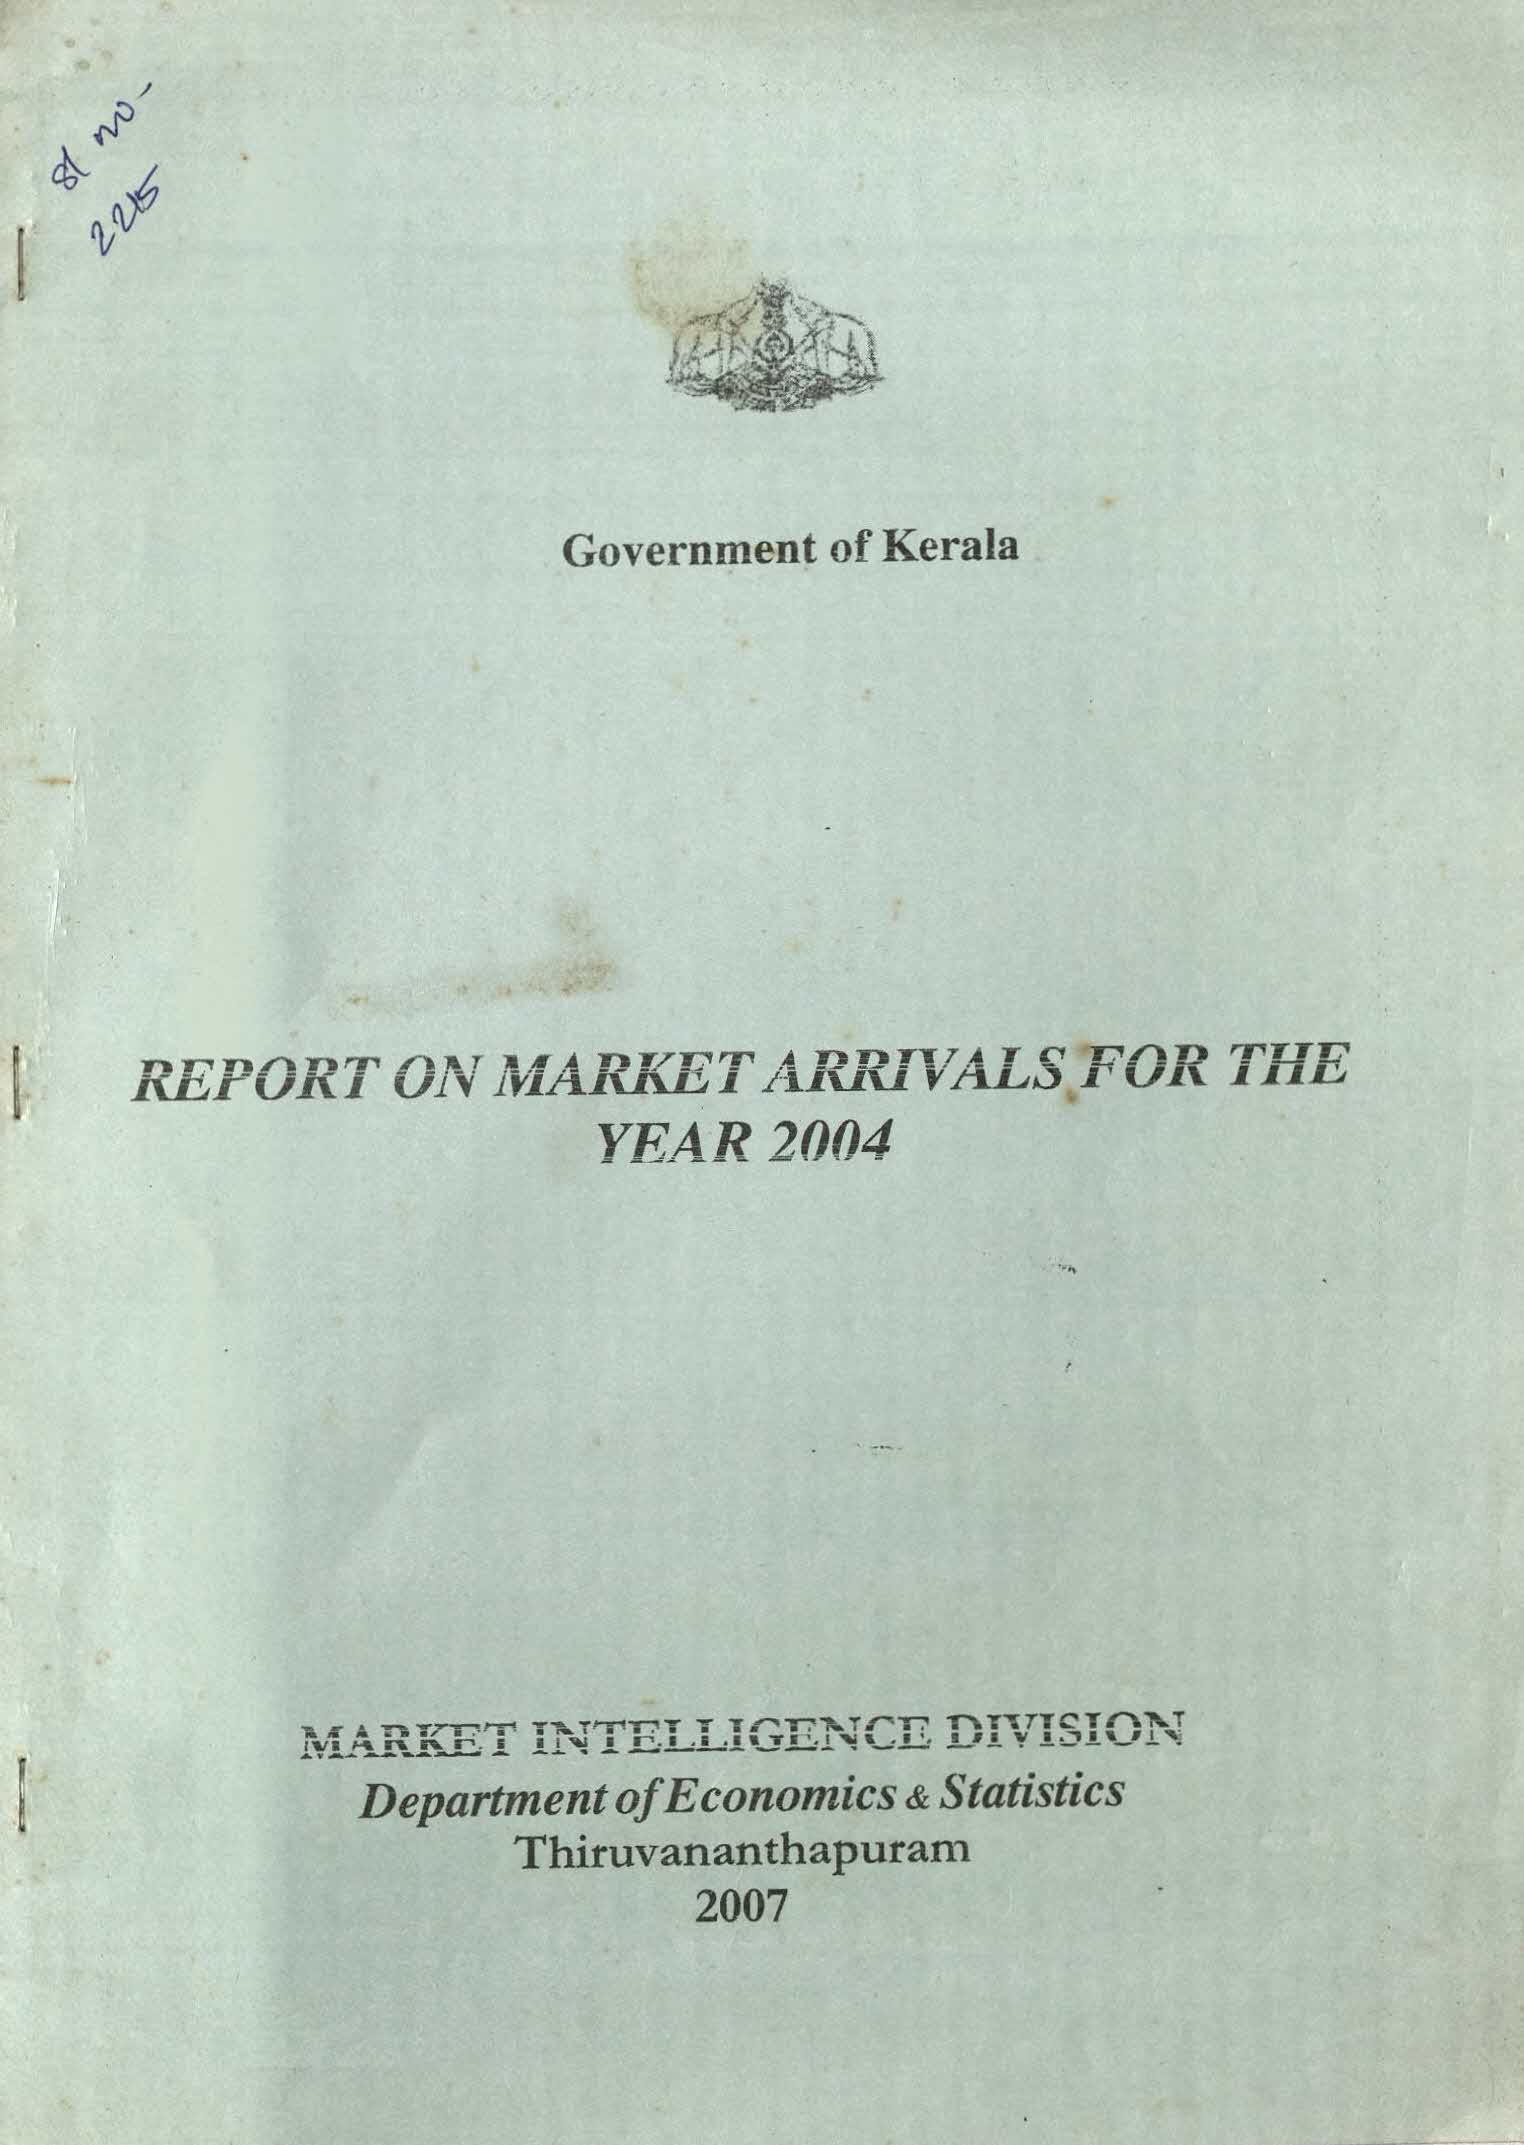 REPORT ON MARKET ARRIVALS FOR THE YEAR 2004